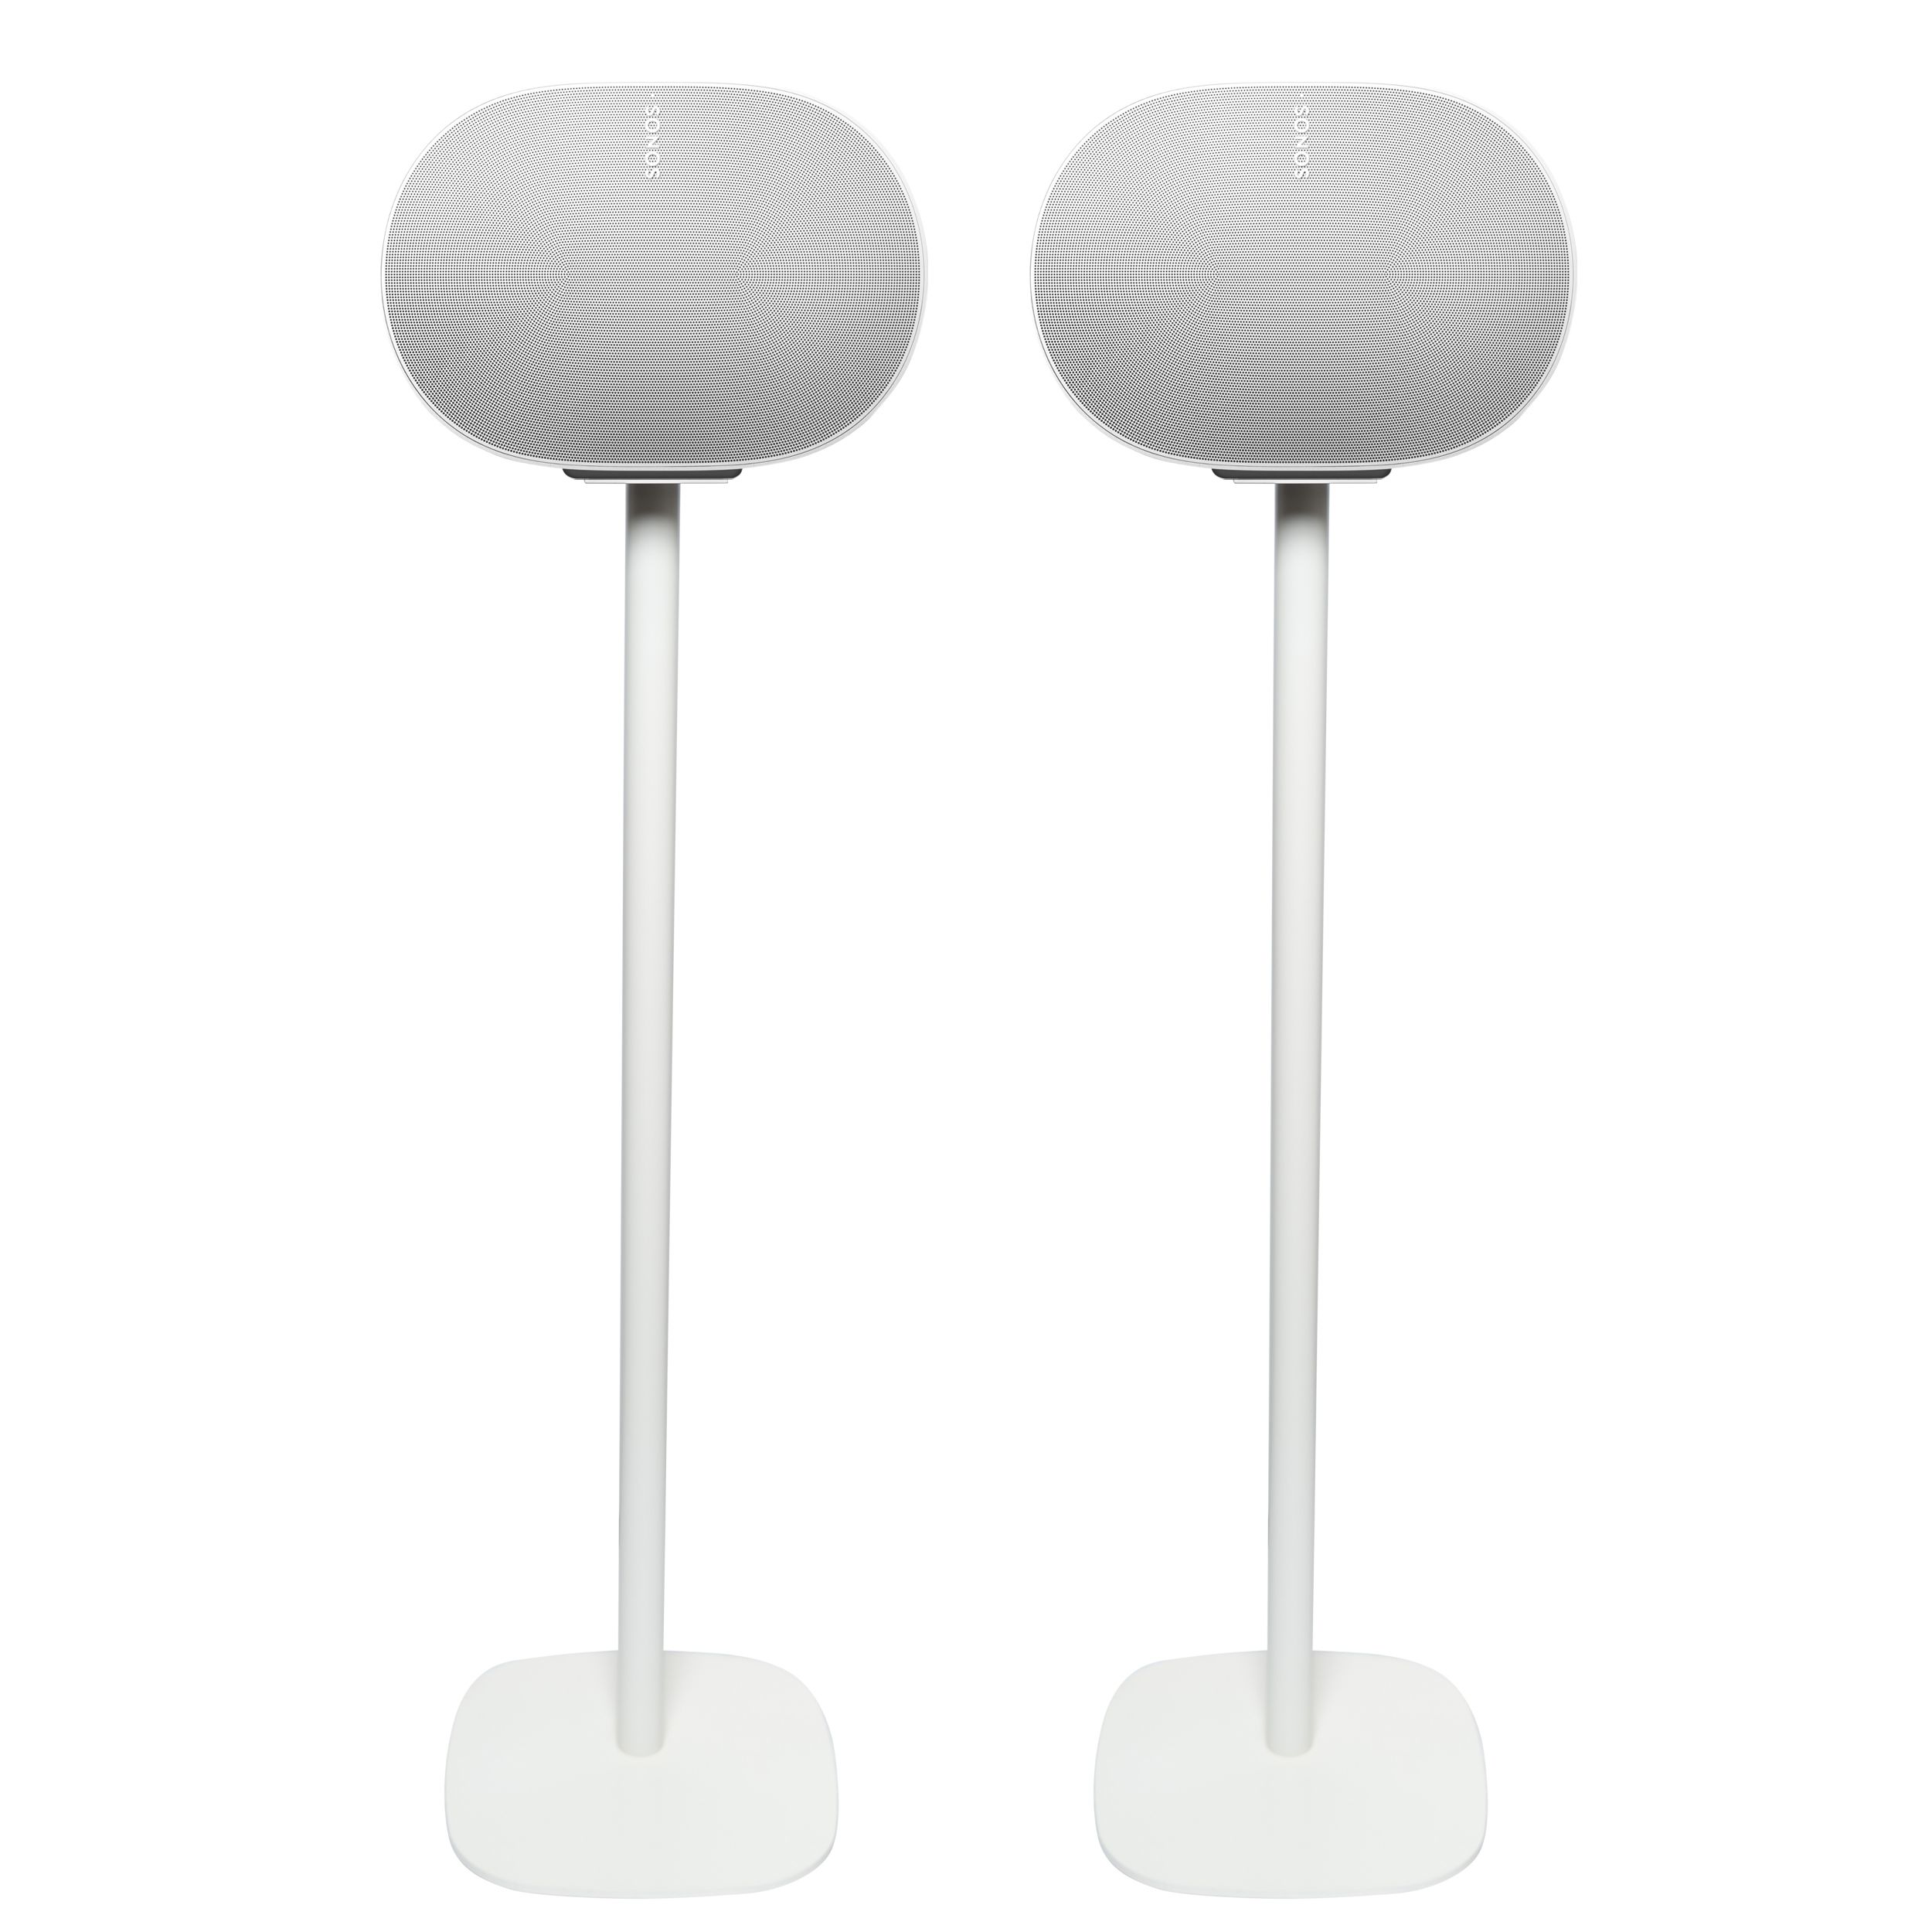 Vebos floor stand Sonos Era 300 white set | The floor stand for